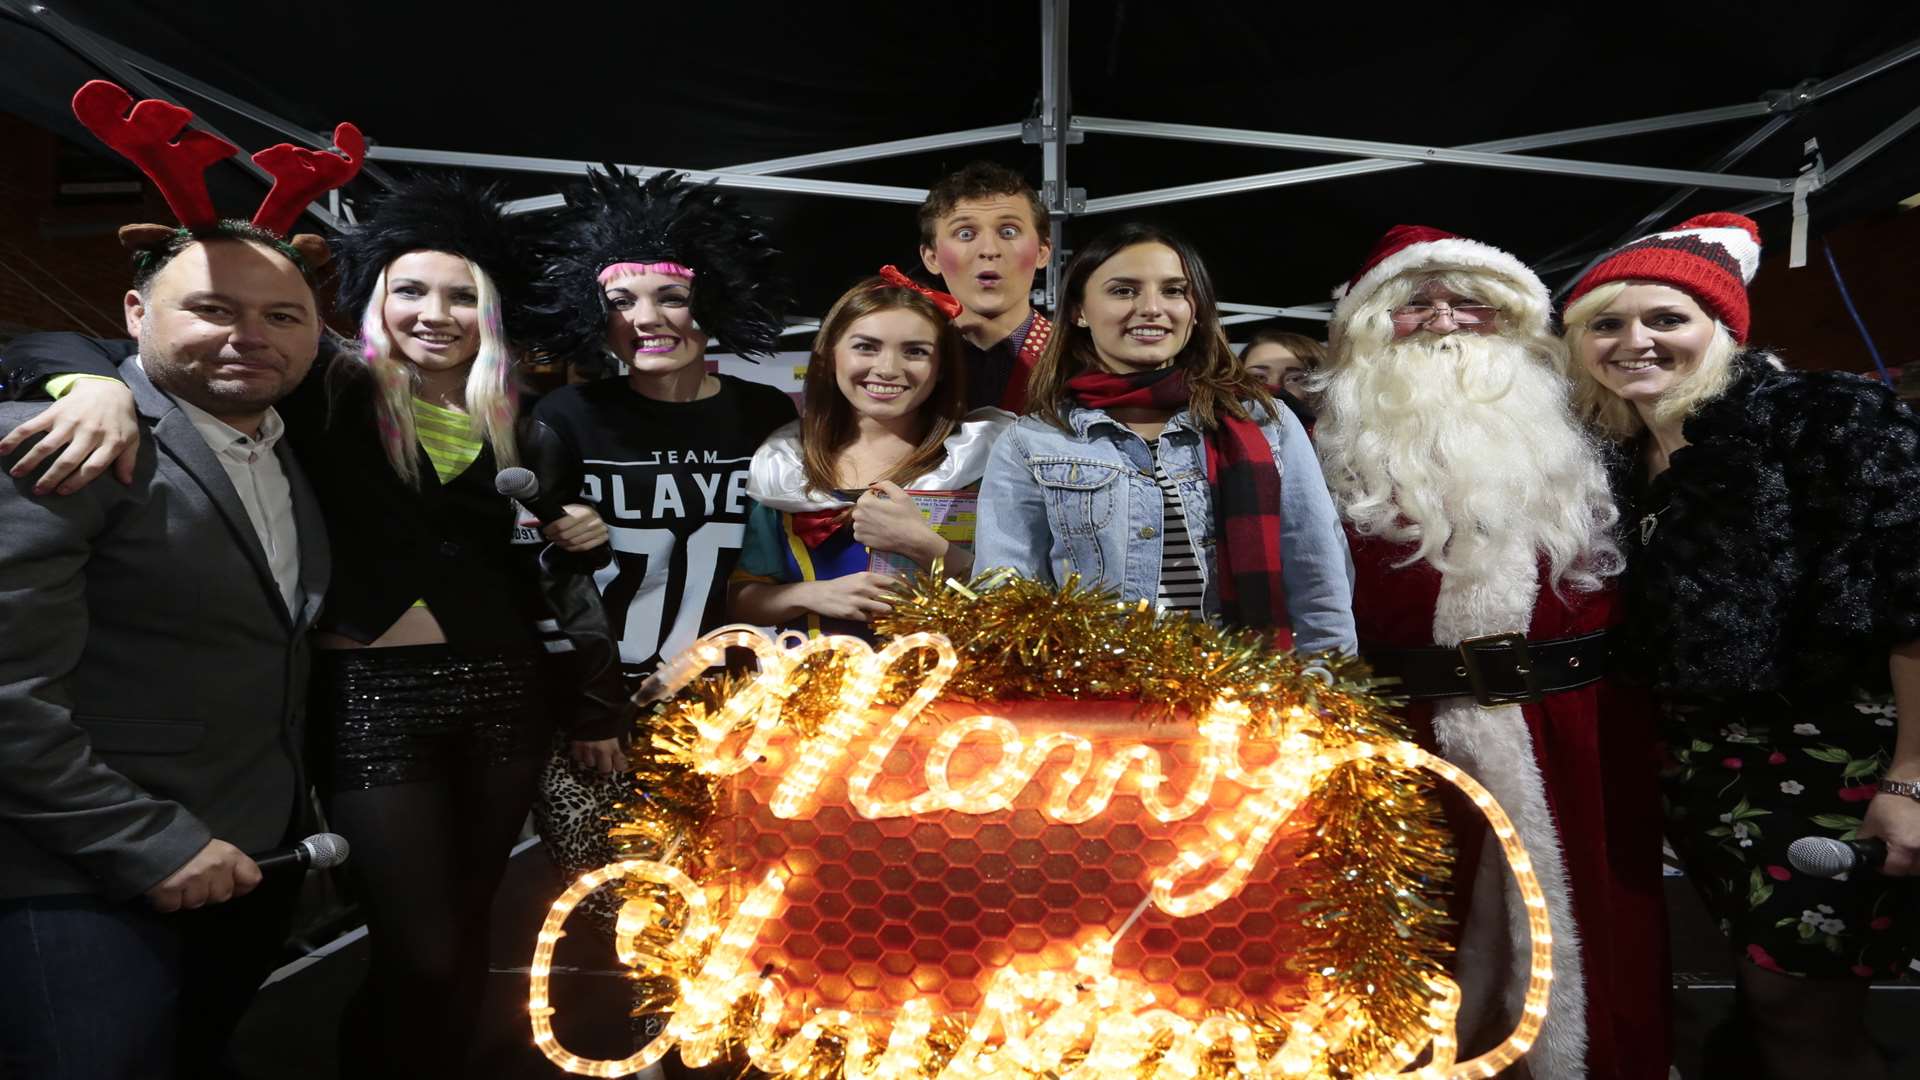 Kmfm breakfast show presenters Emma and Garry host the Fremlin Walk Christmas lights switch-on by Made In Chelsea's Lucy Watson